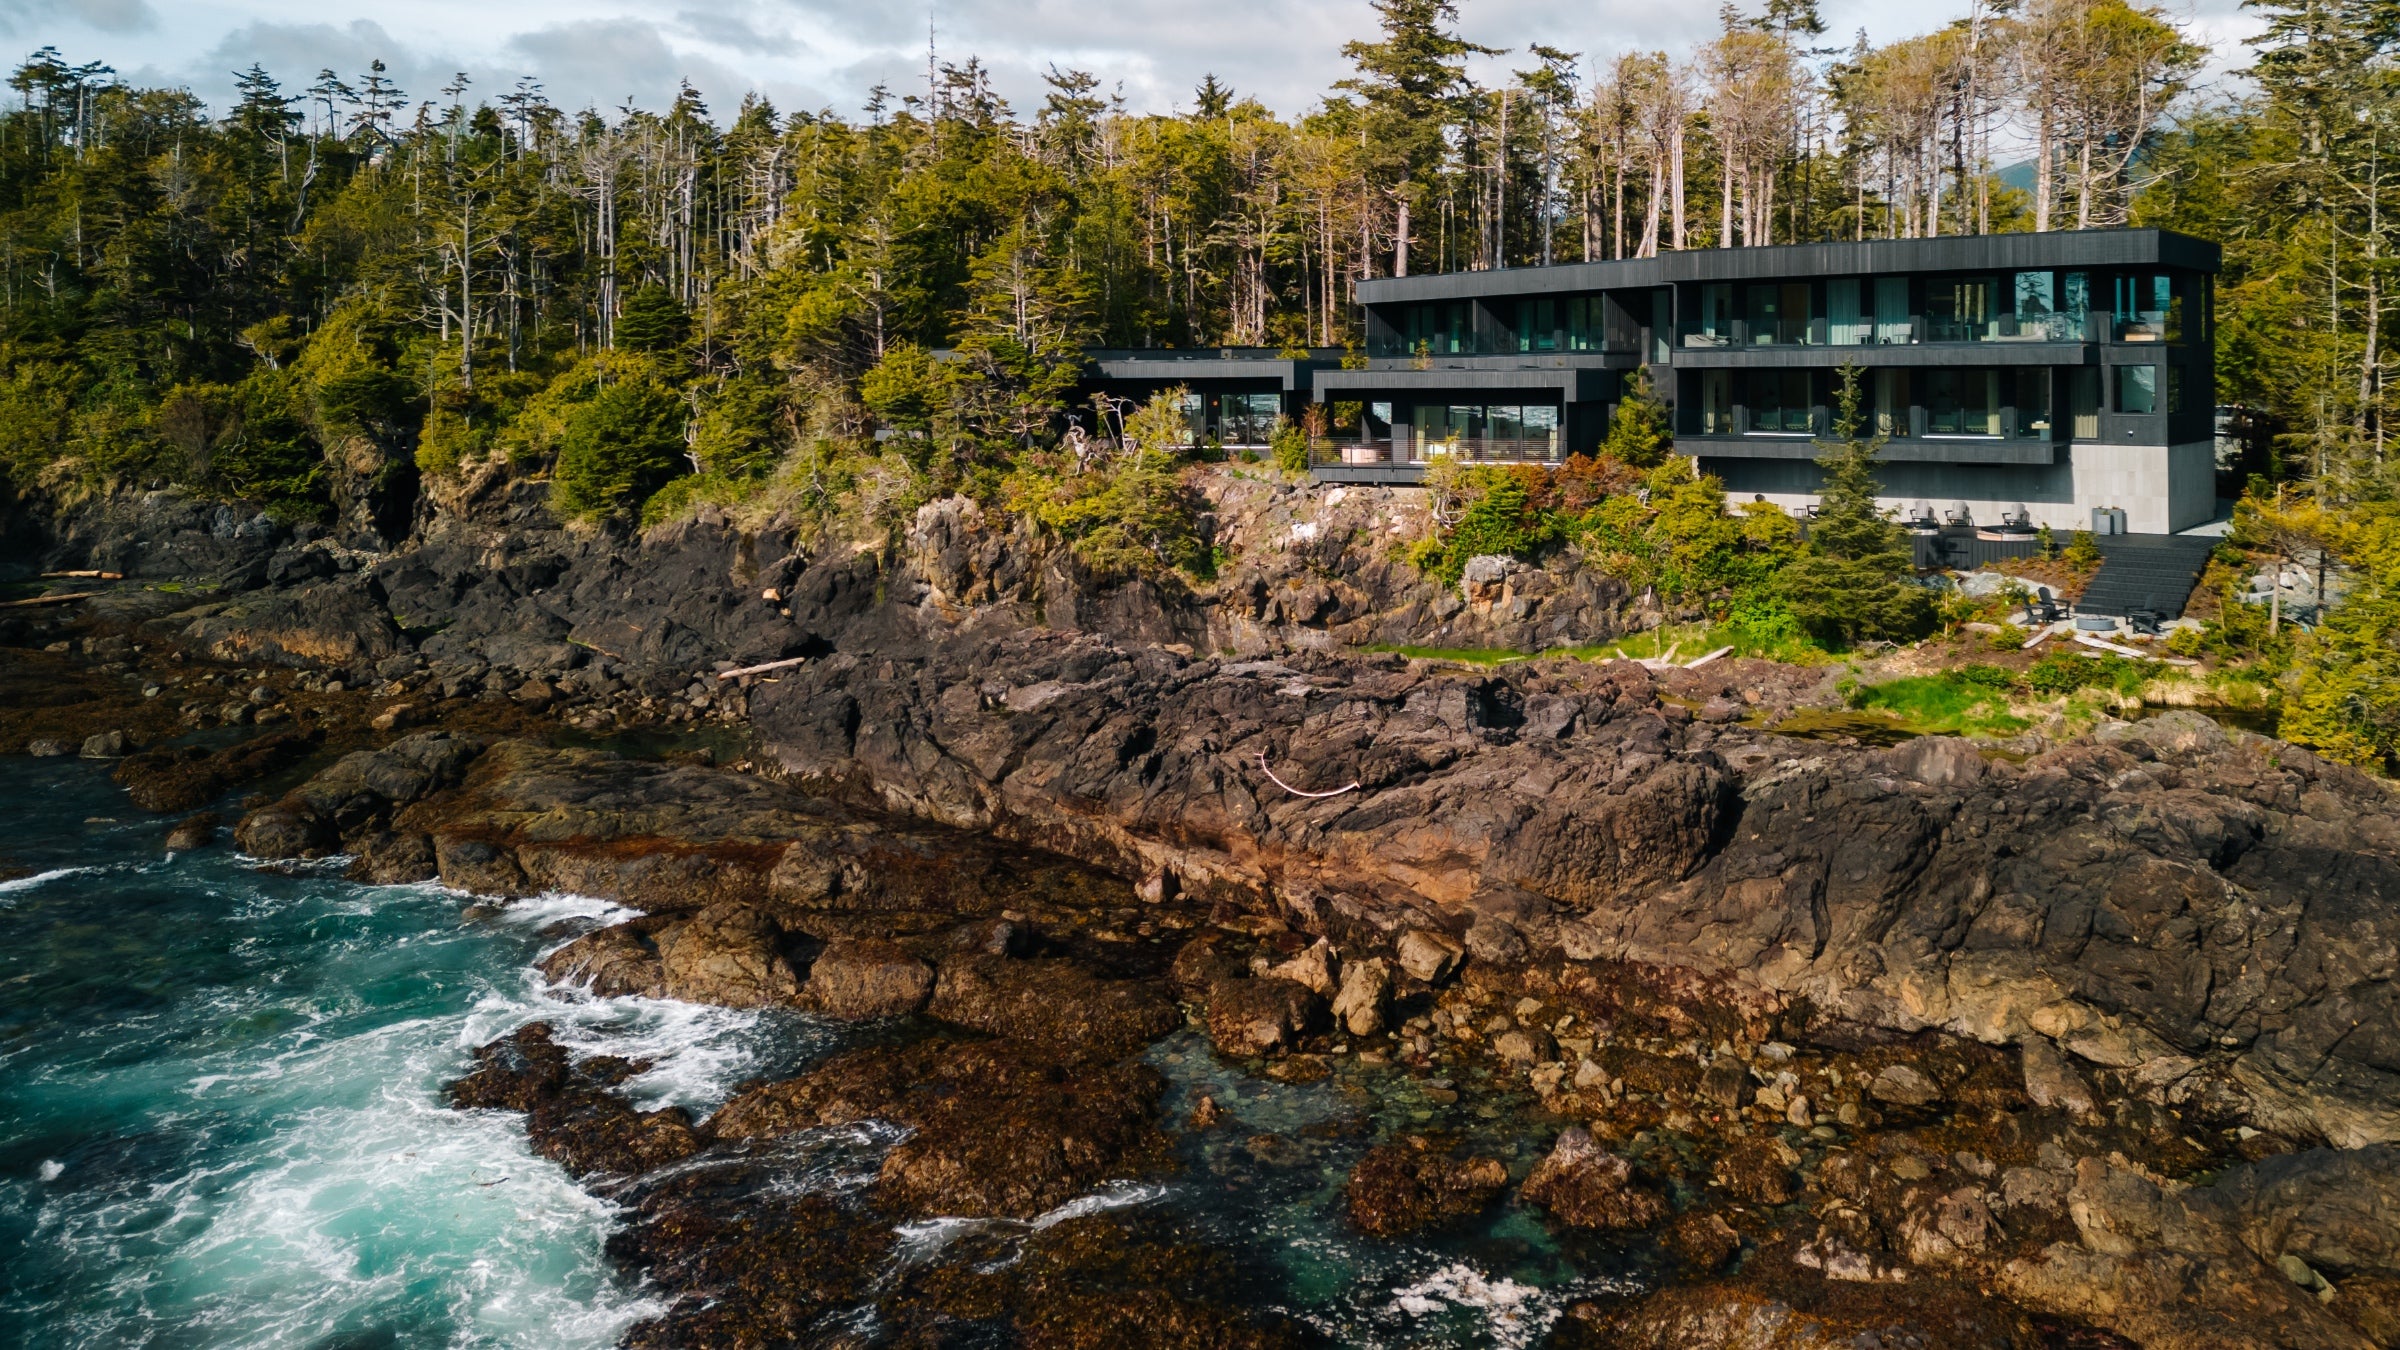 The Newest Coastal Storm-Watching Hotel in British Columbia